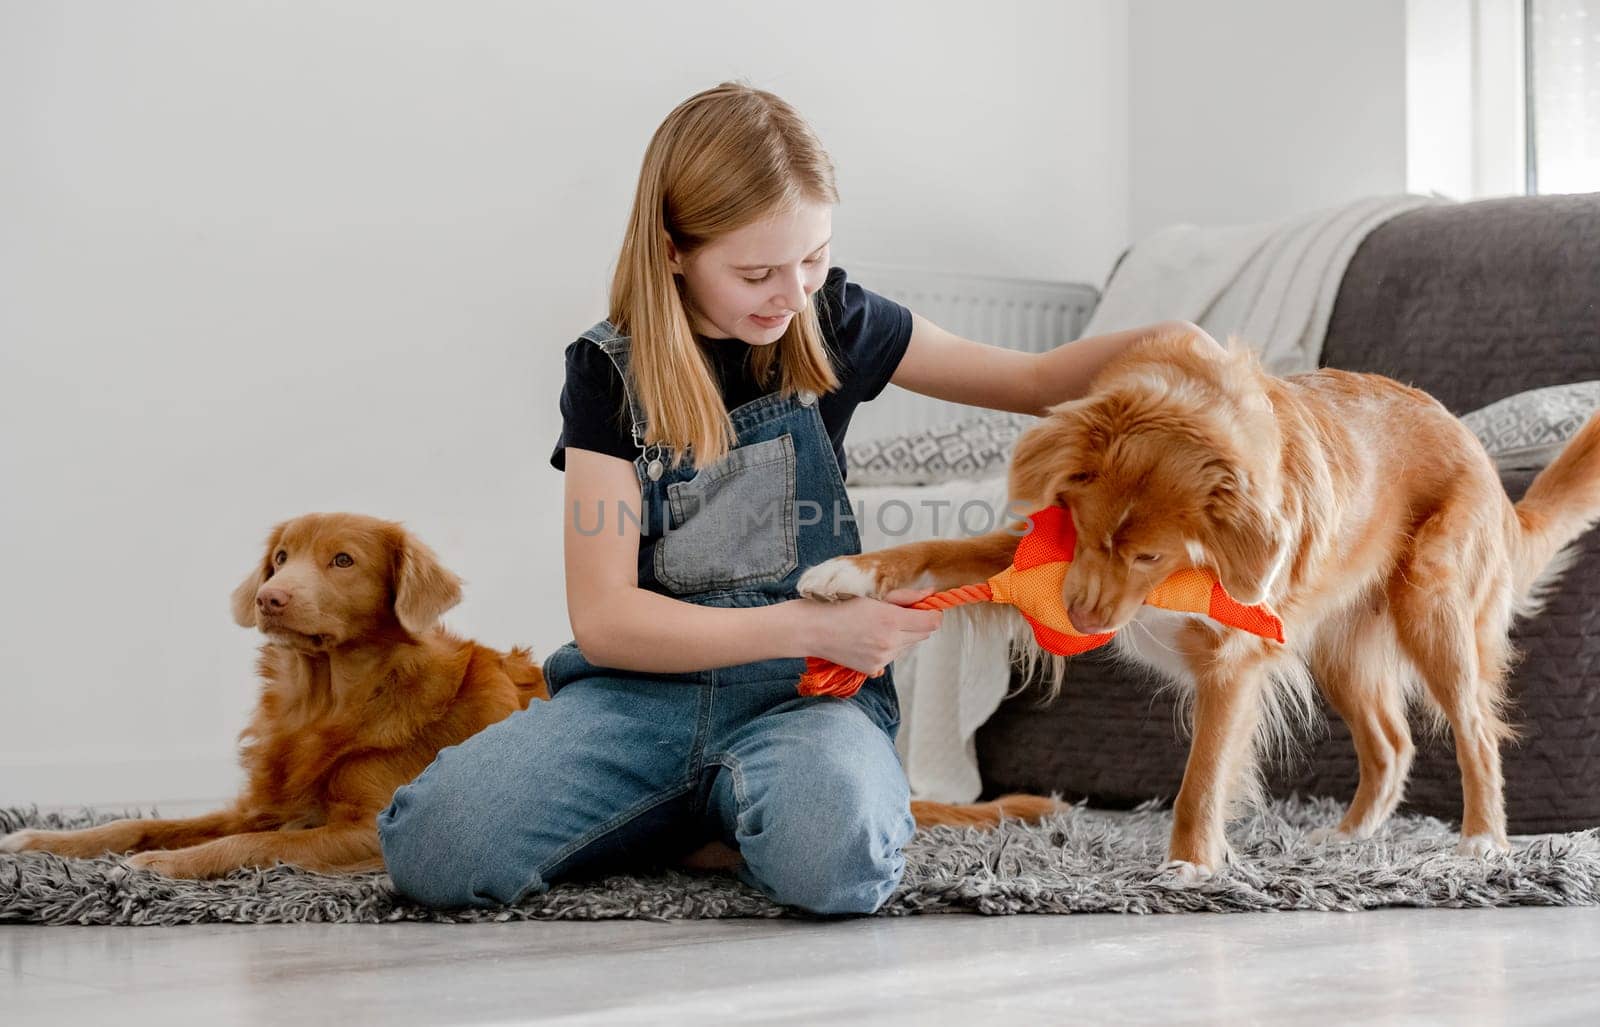 Girl Plays With Two Nova Scotia Retrievers At Home On The Floor With A Duck Toy, Nova Scotia Retriever Toller